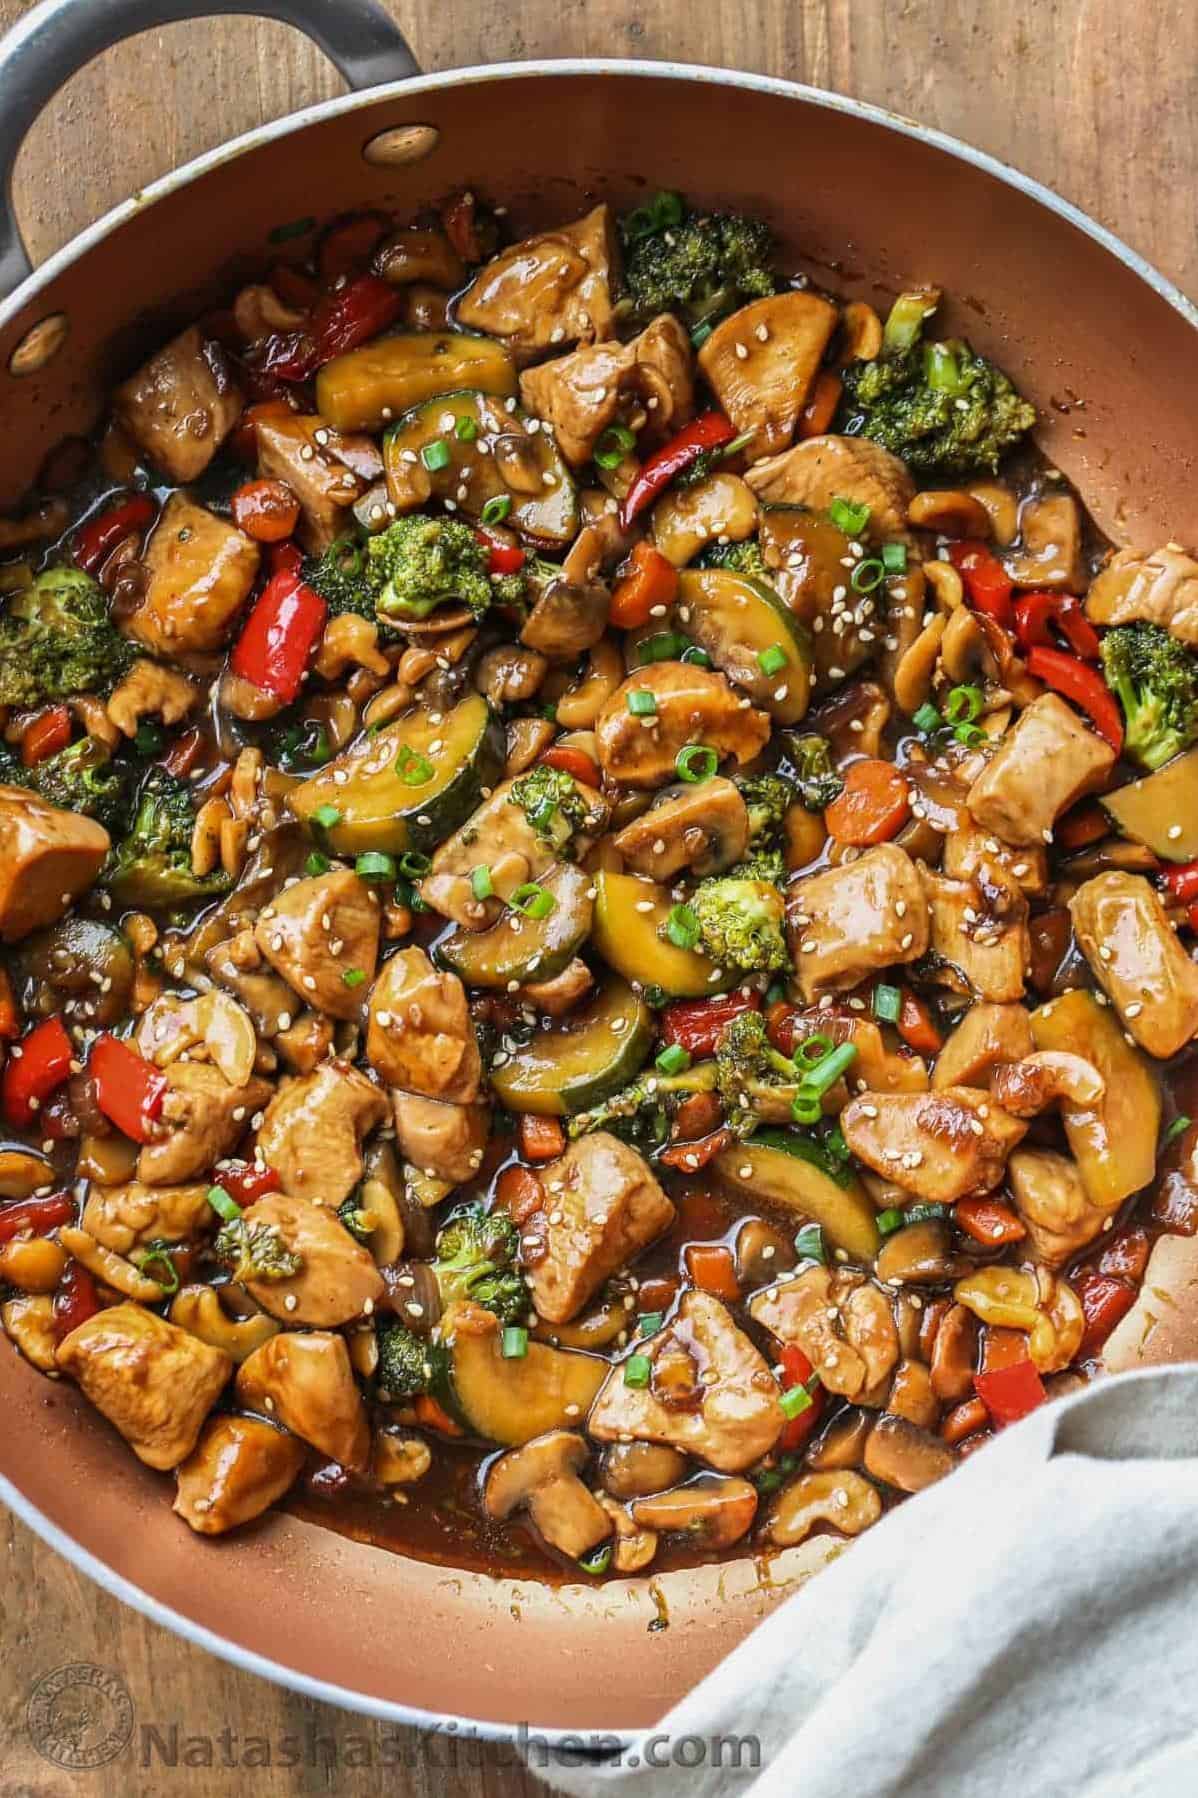  Take your taste buds on a ride with this savory and zesty chicken stir-fry!